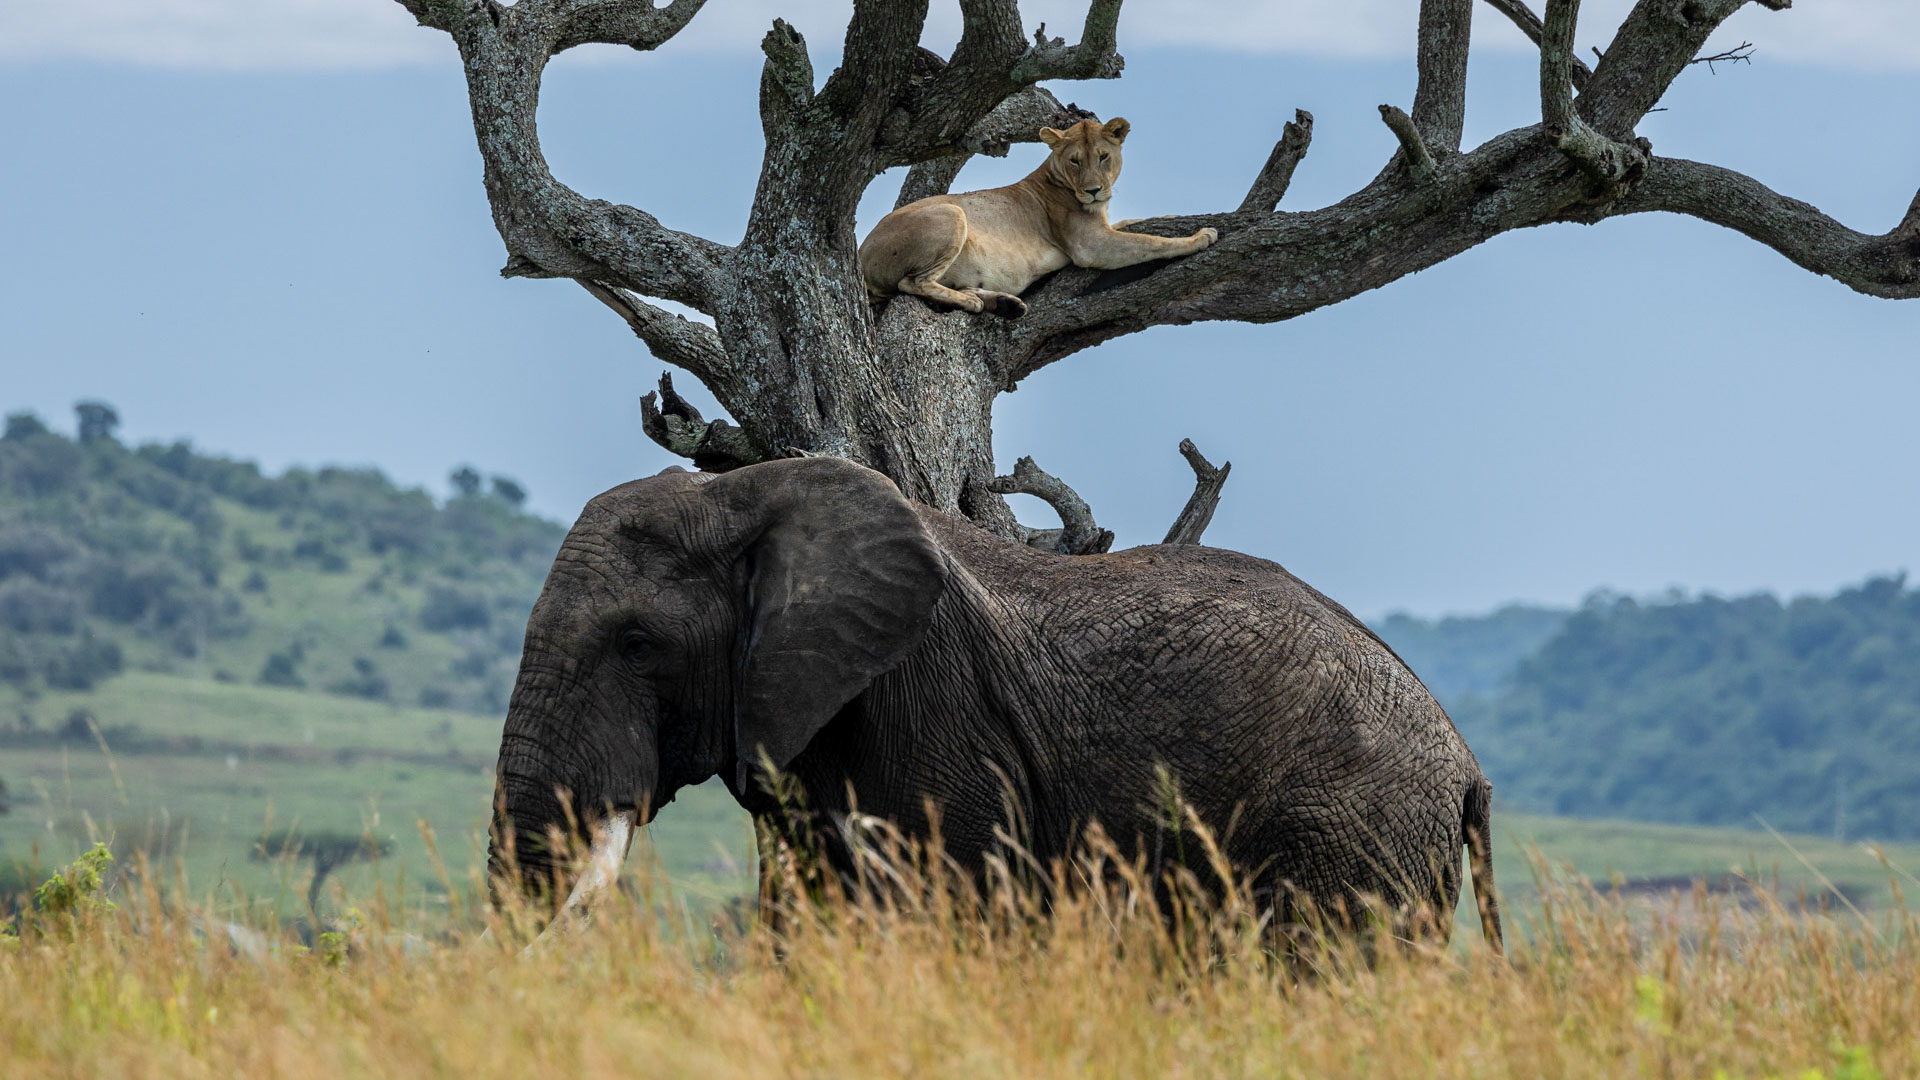 Above: The Angama Lioness does some animal watching 